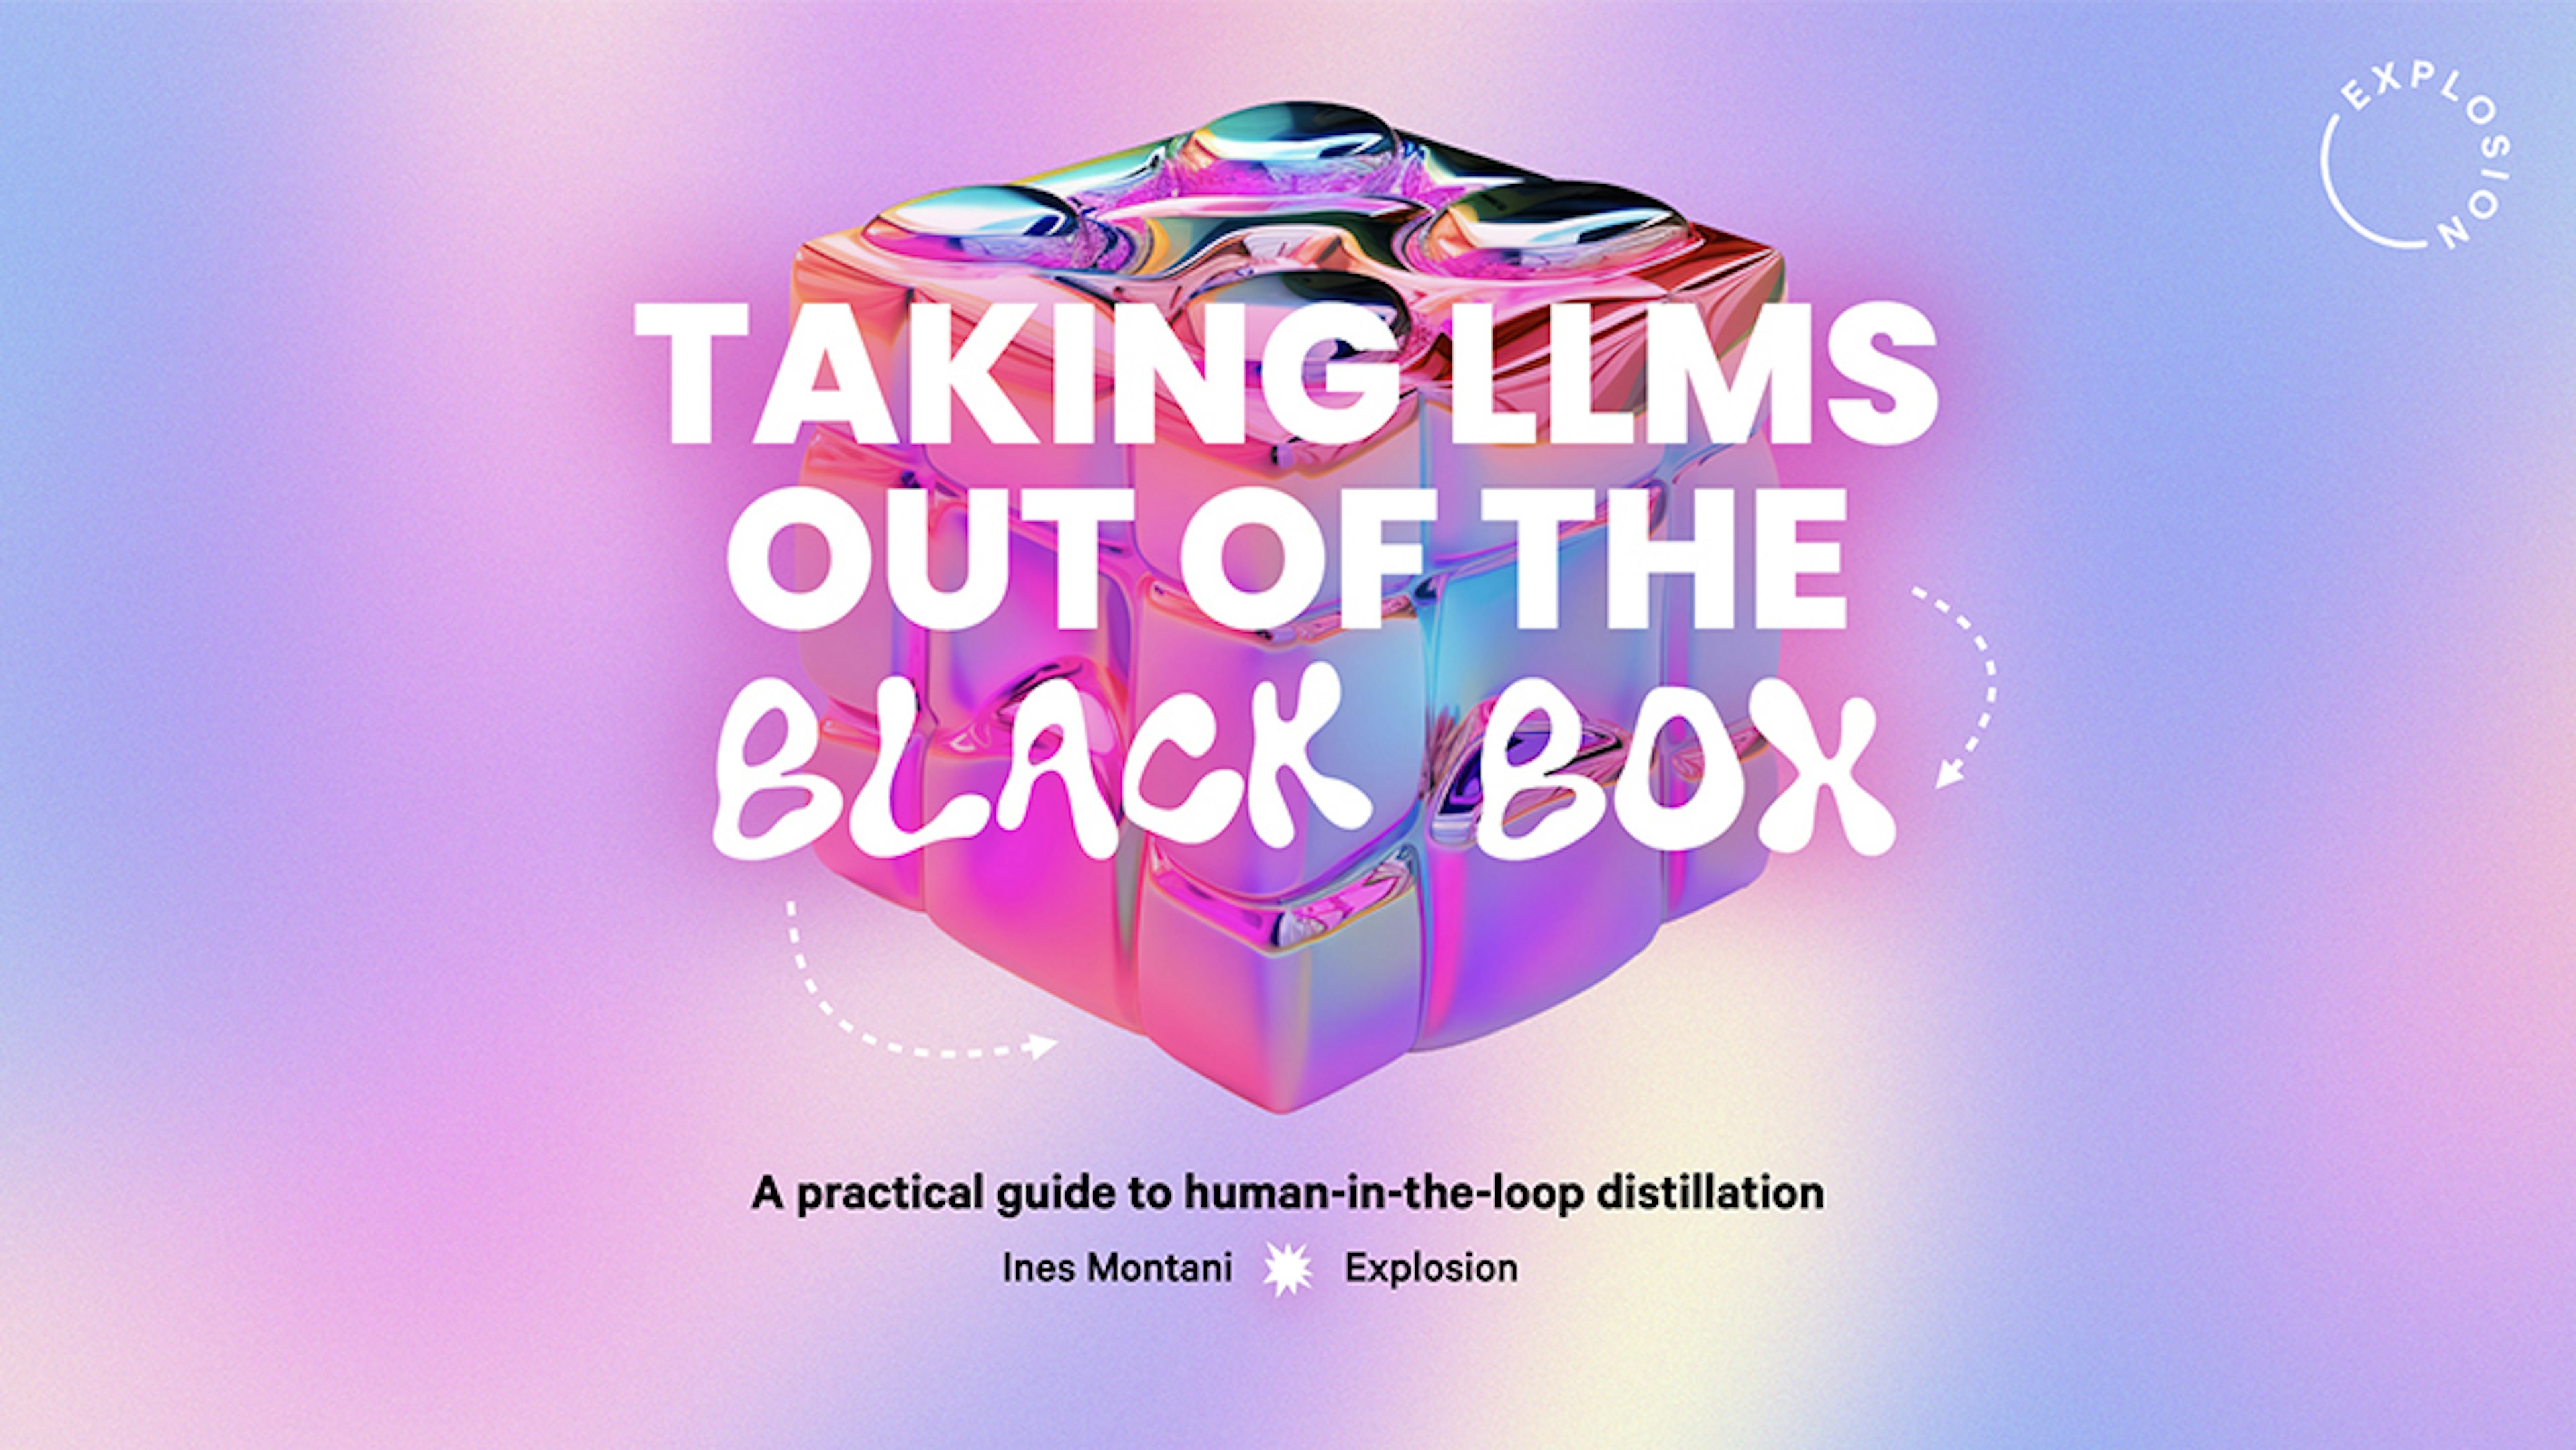 Taking LLMs out of the black box: A practical guide to human-in-the-loop distillation